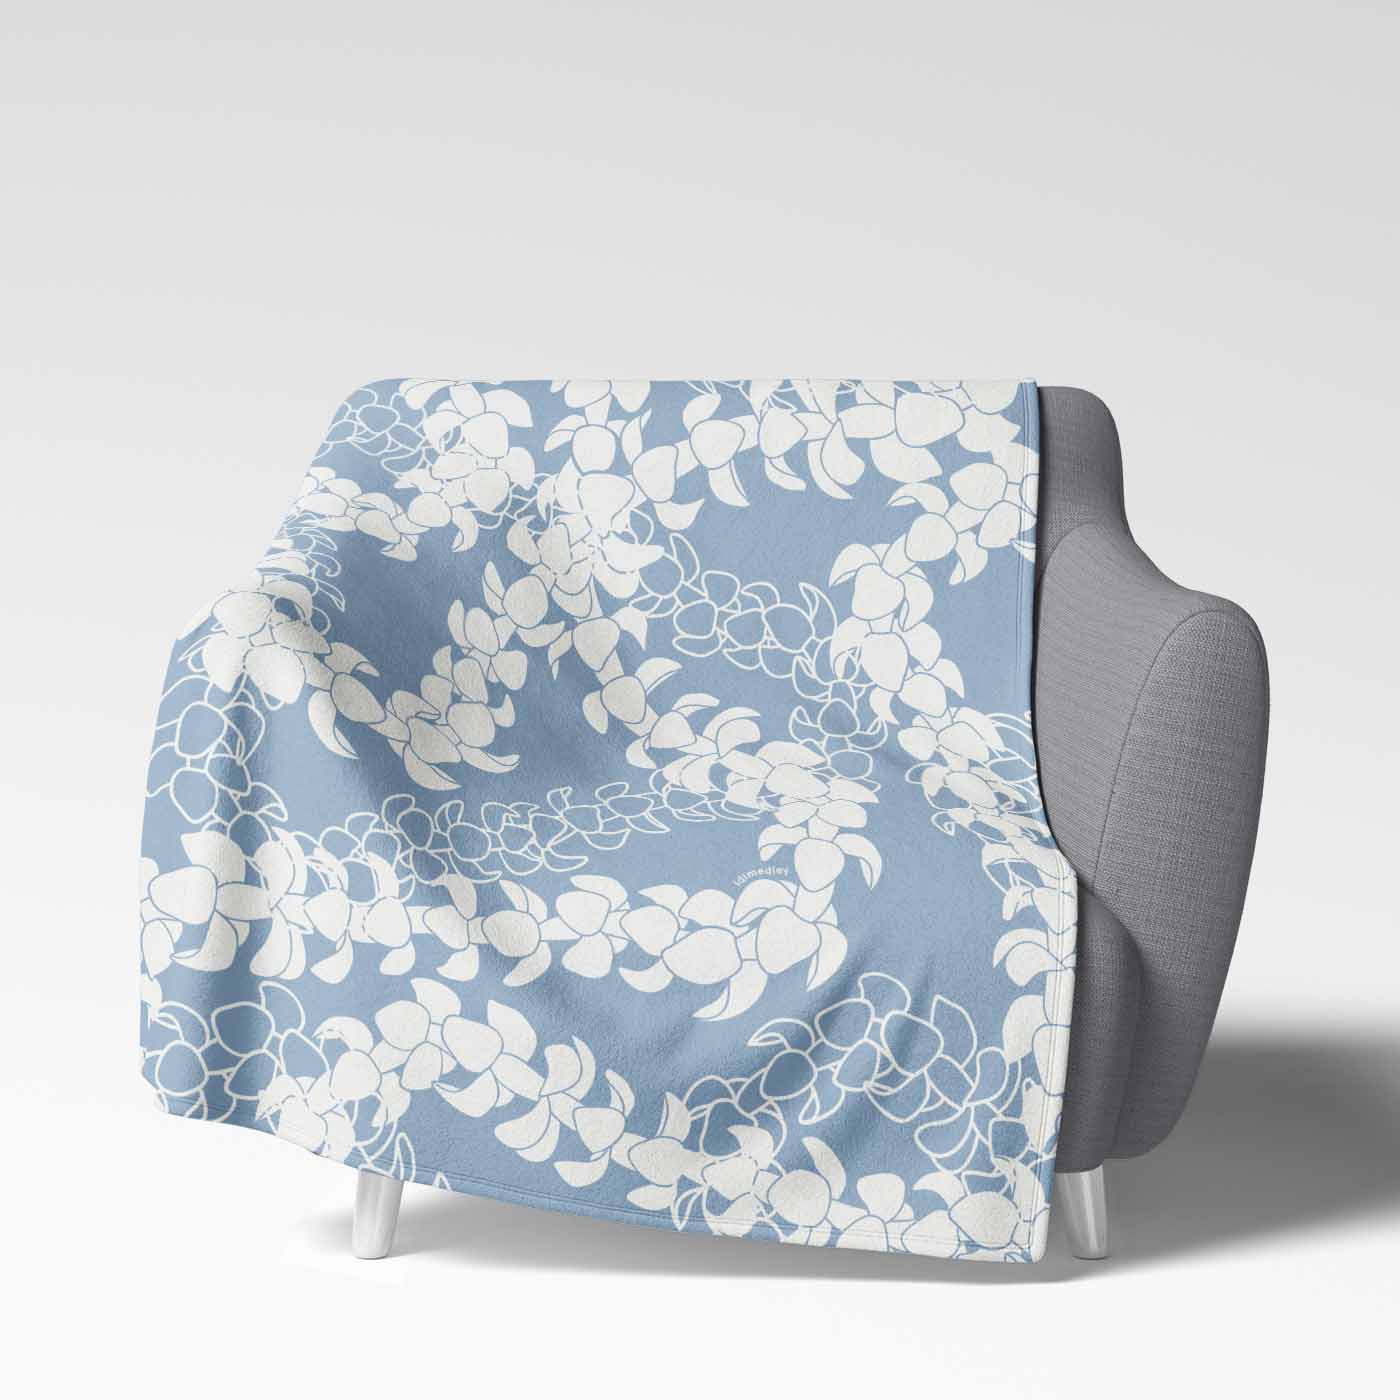 Soft velveteen blanket with a design displaying multiple Puakenikeni flower lei strands in white silhouettes and line art on a light blue background.